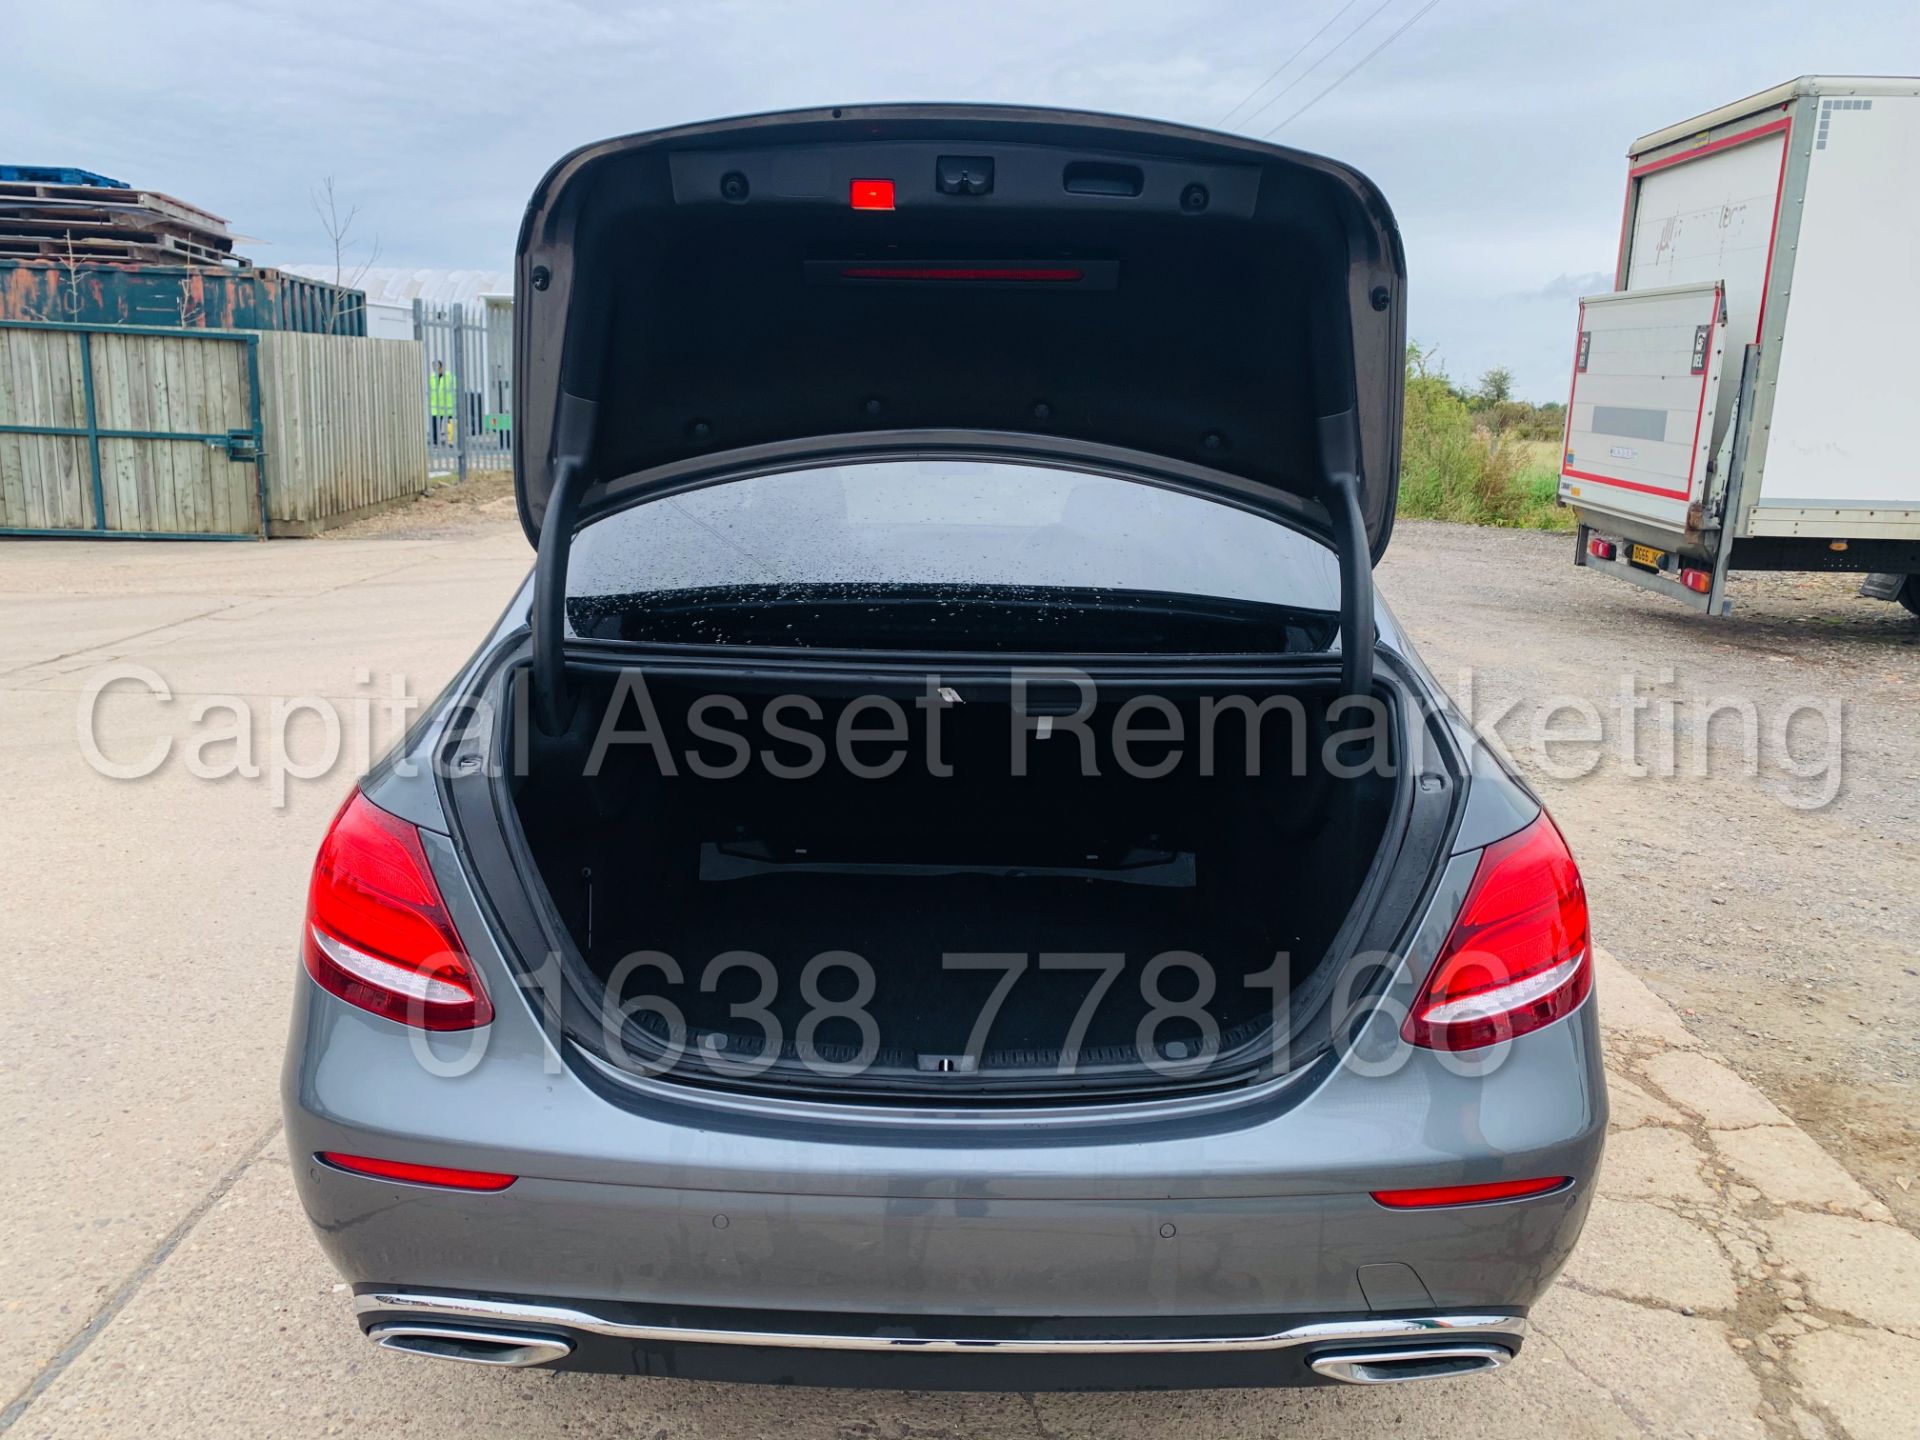 MERCEDES-BENZ E220D *SALOON* (2018 - NEW MODEL) '9-G TRONIC AUTO - LEATHER - SAT NAV' - Image 30 of 53